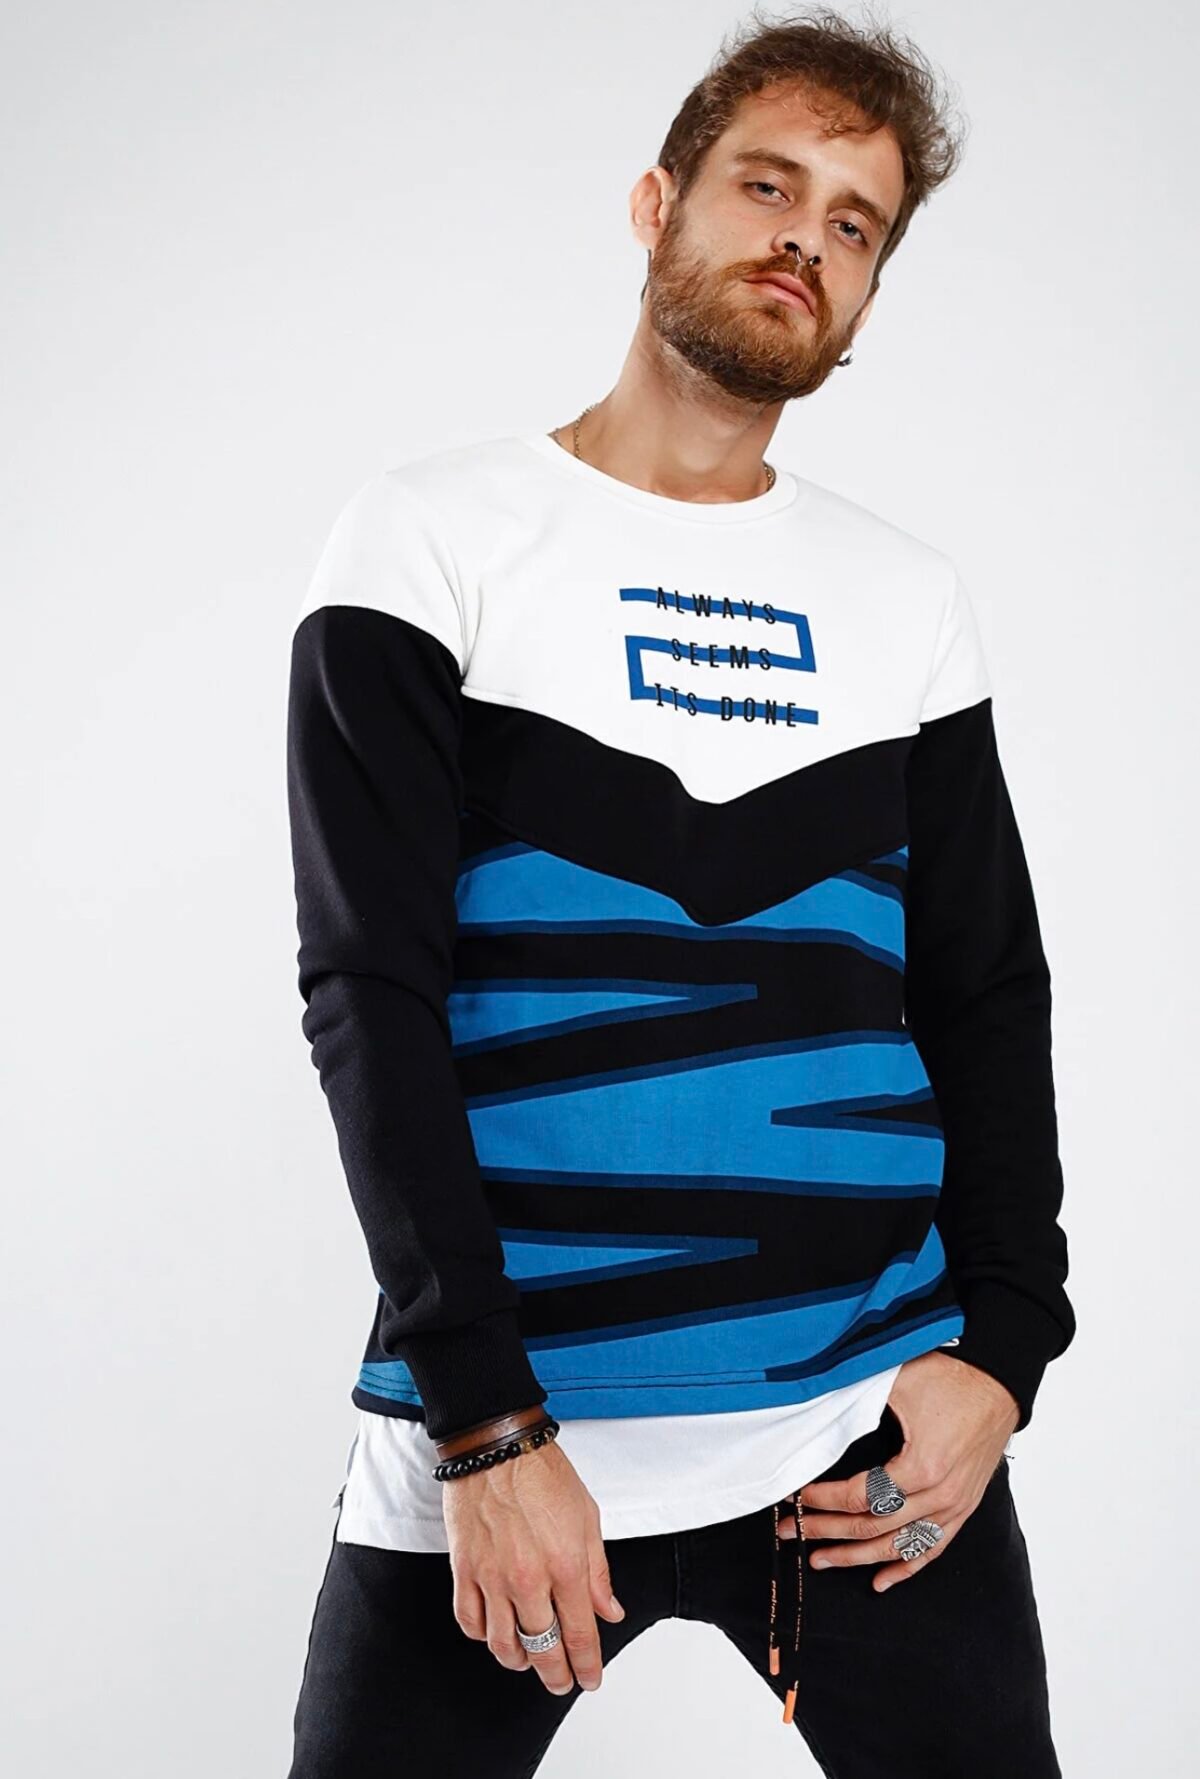 LaFaba Collection Multicolour Jumper for Men by Picks for Less